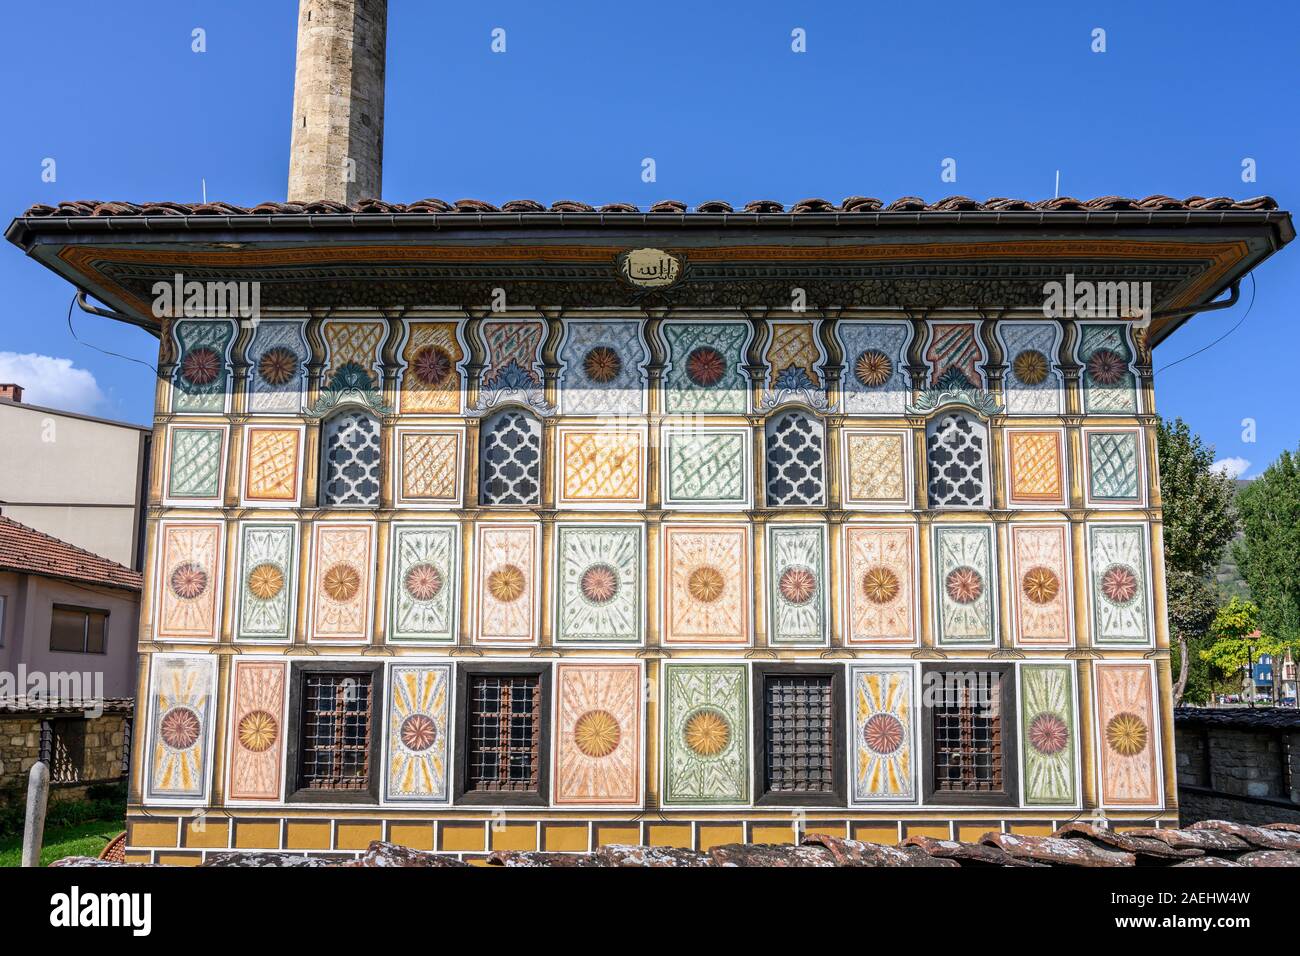 The Šarena Mosque or decorated/painted mosque originaly built in 1438 and re-built in 1833, in the centre of Tetovo in North Macedonia. Stock Photo